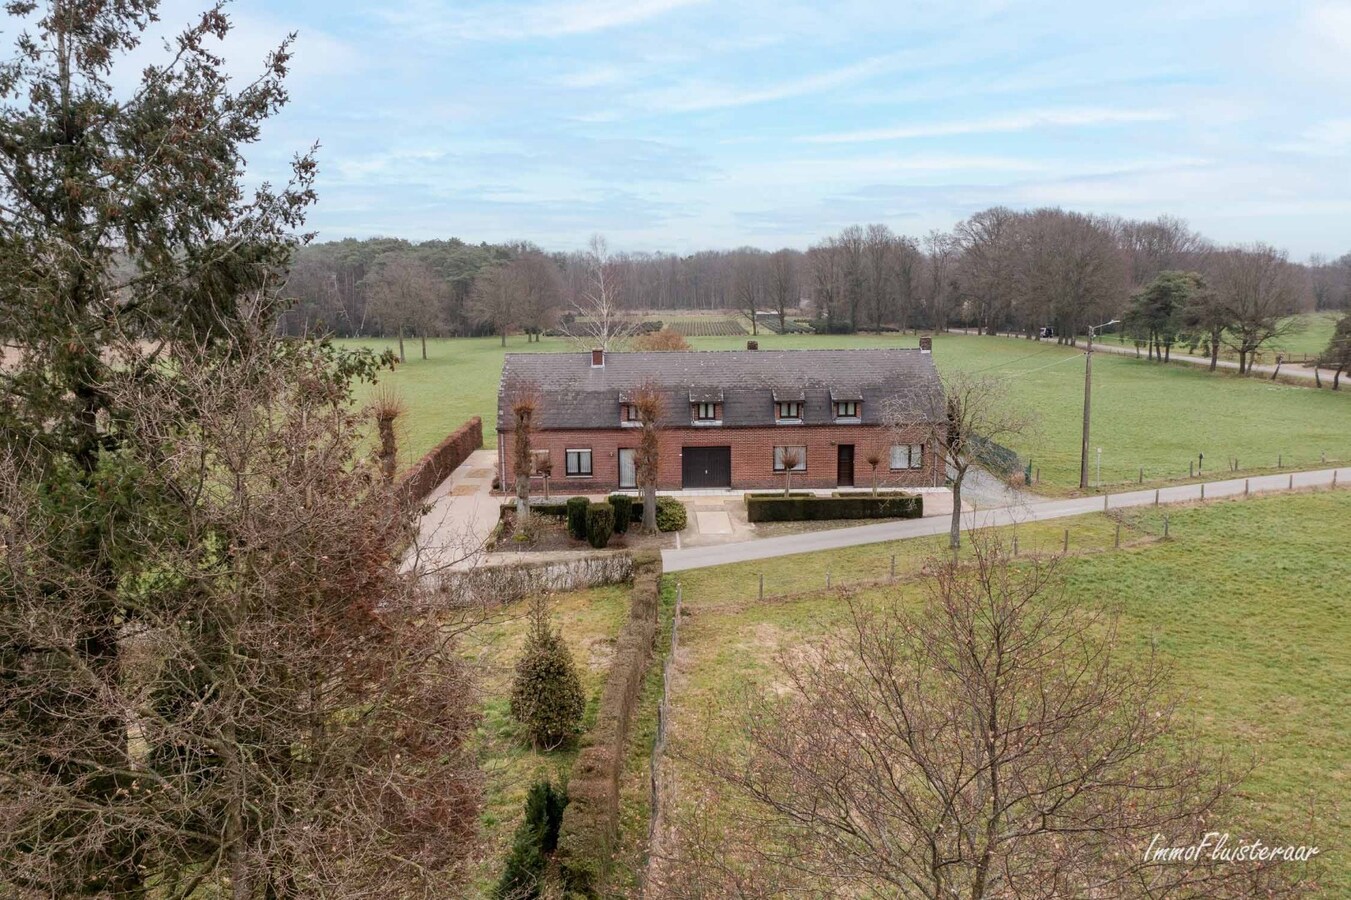 Property for sale in Grote Brogel